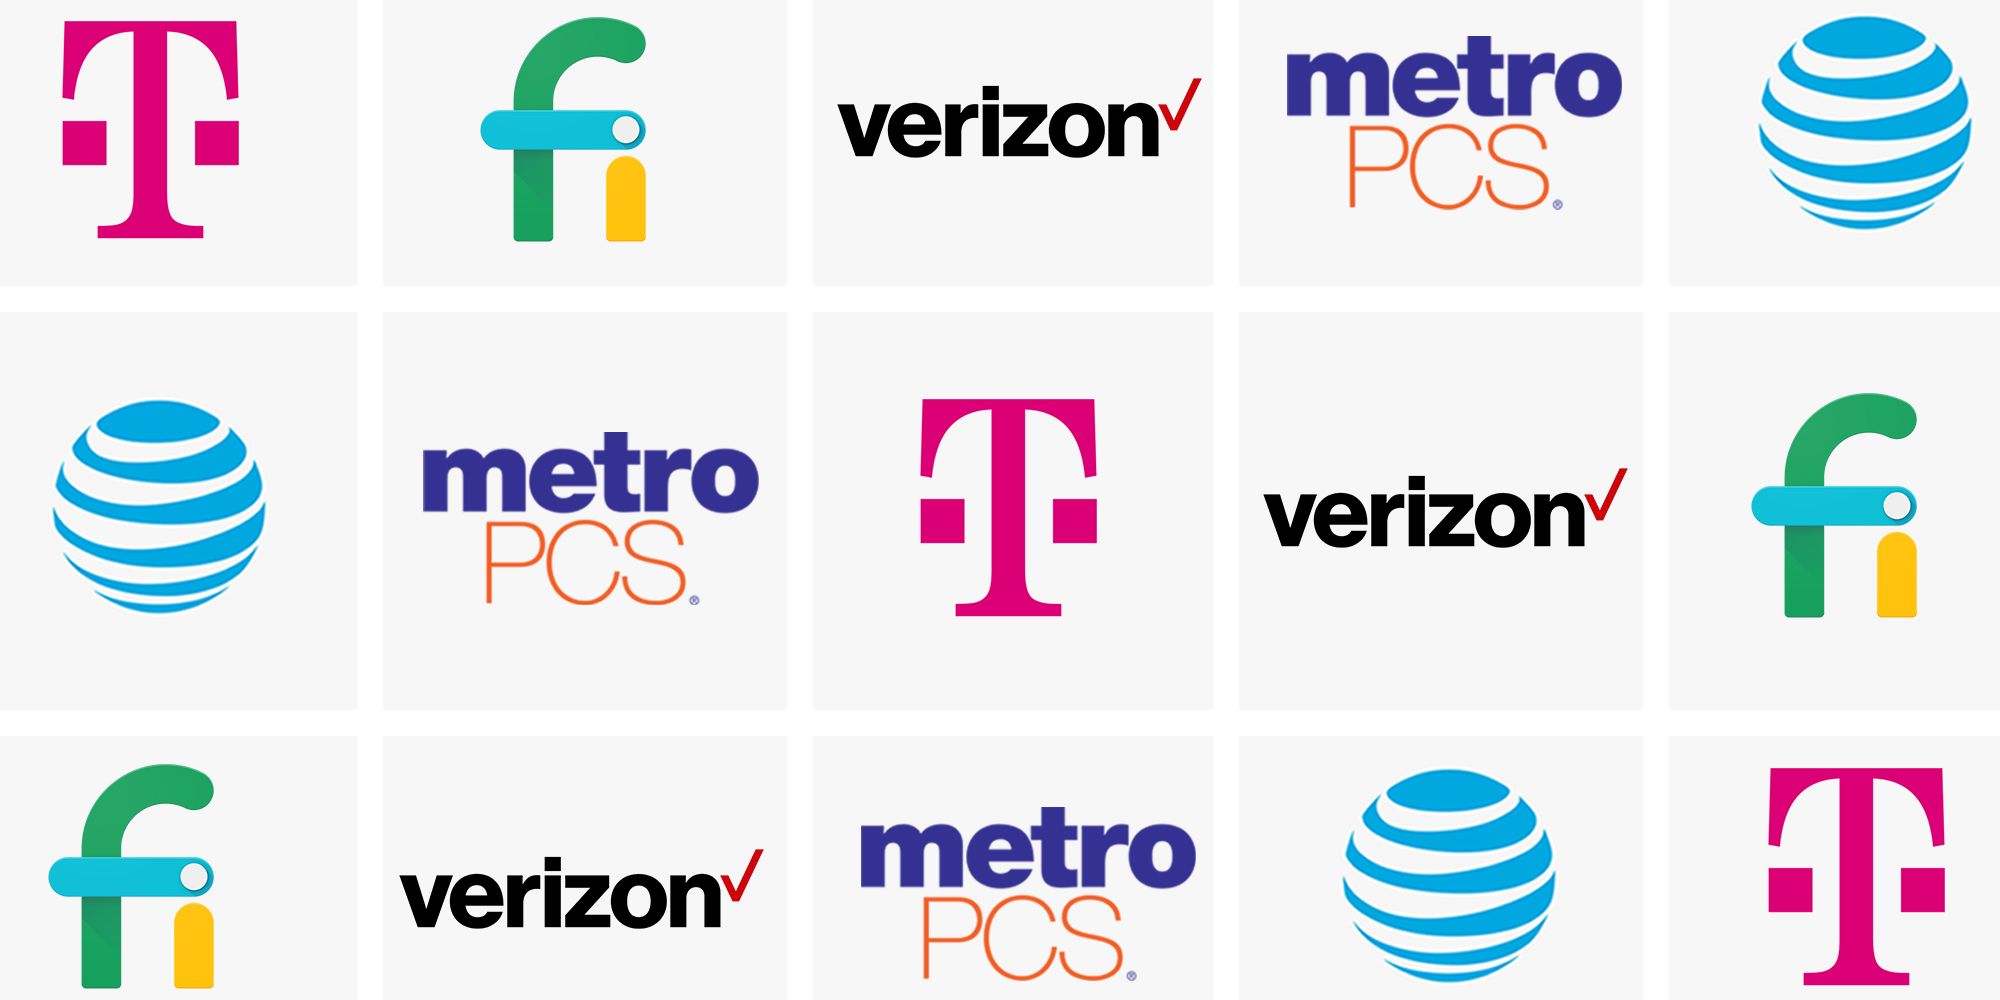 5 Best Cell Phone Plans to Get in 2018 - Best Verizon, T Mobile & AT&T Phone Plans